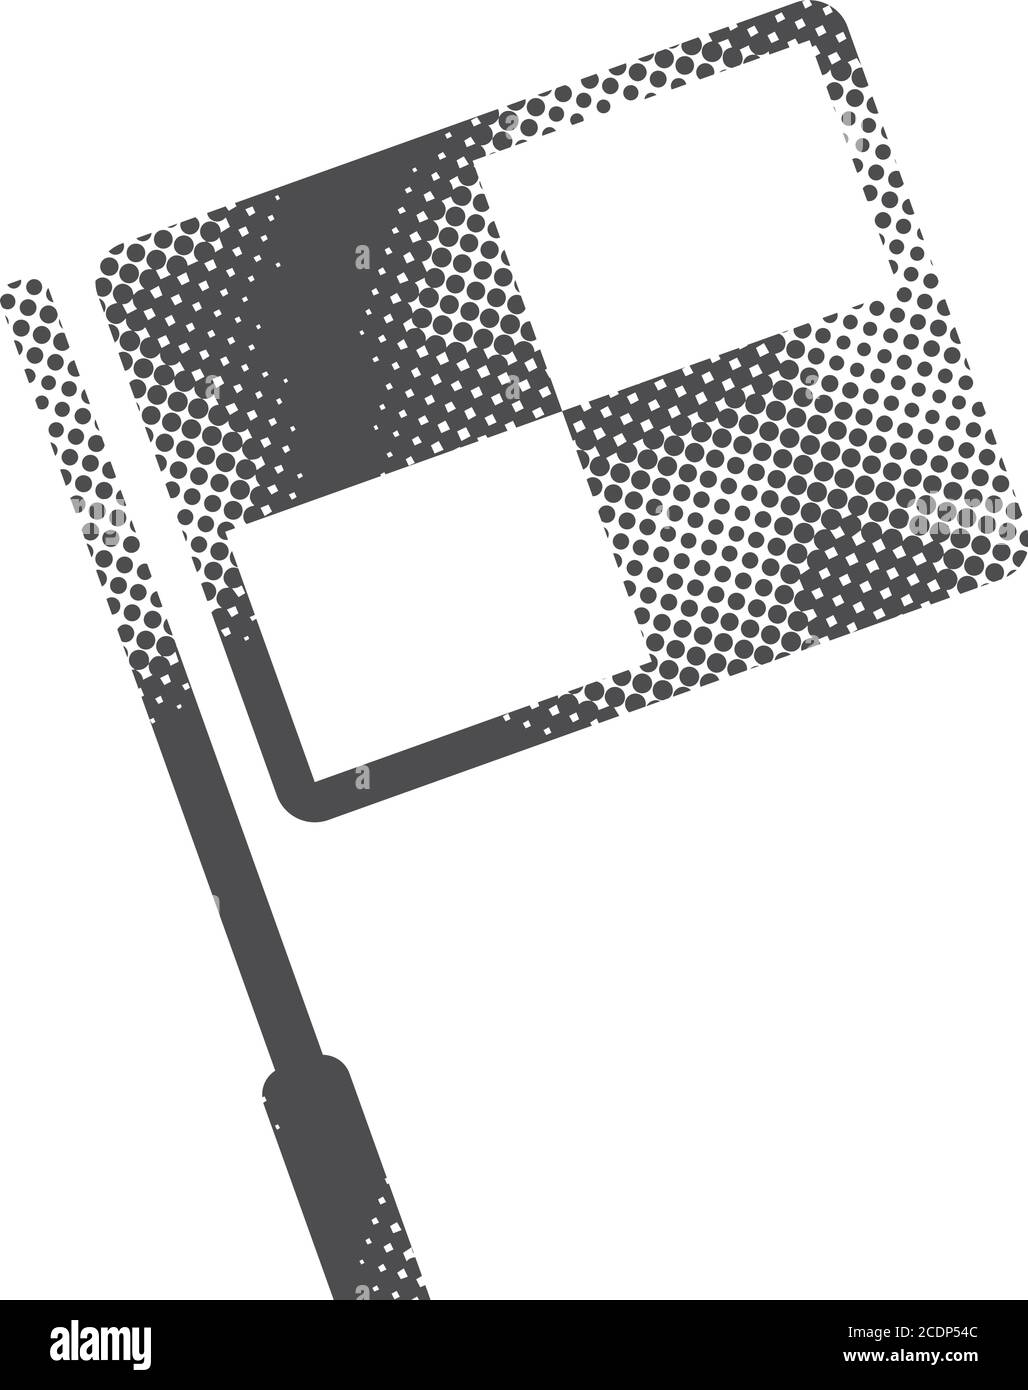 Lineman flag icon in halftone style. Black and white monochrome vector illustration. Stock Vector